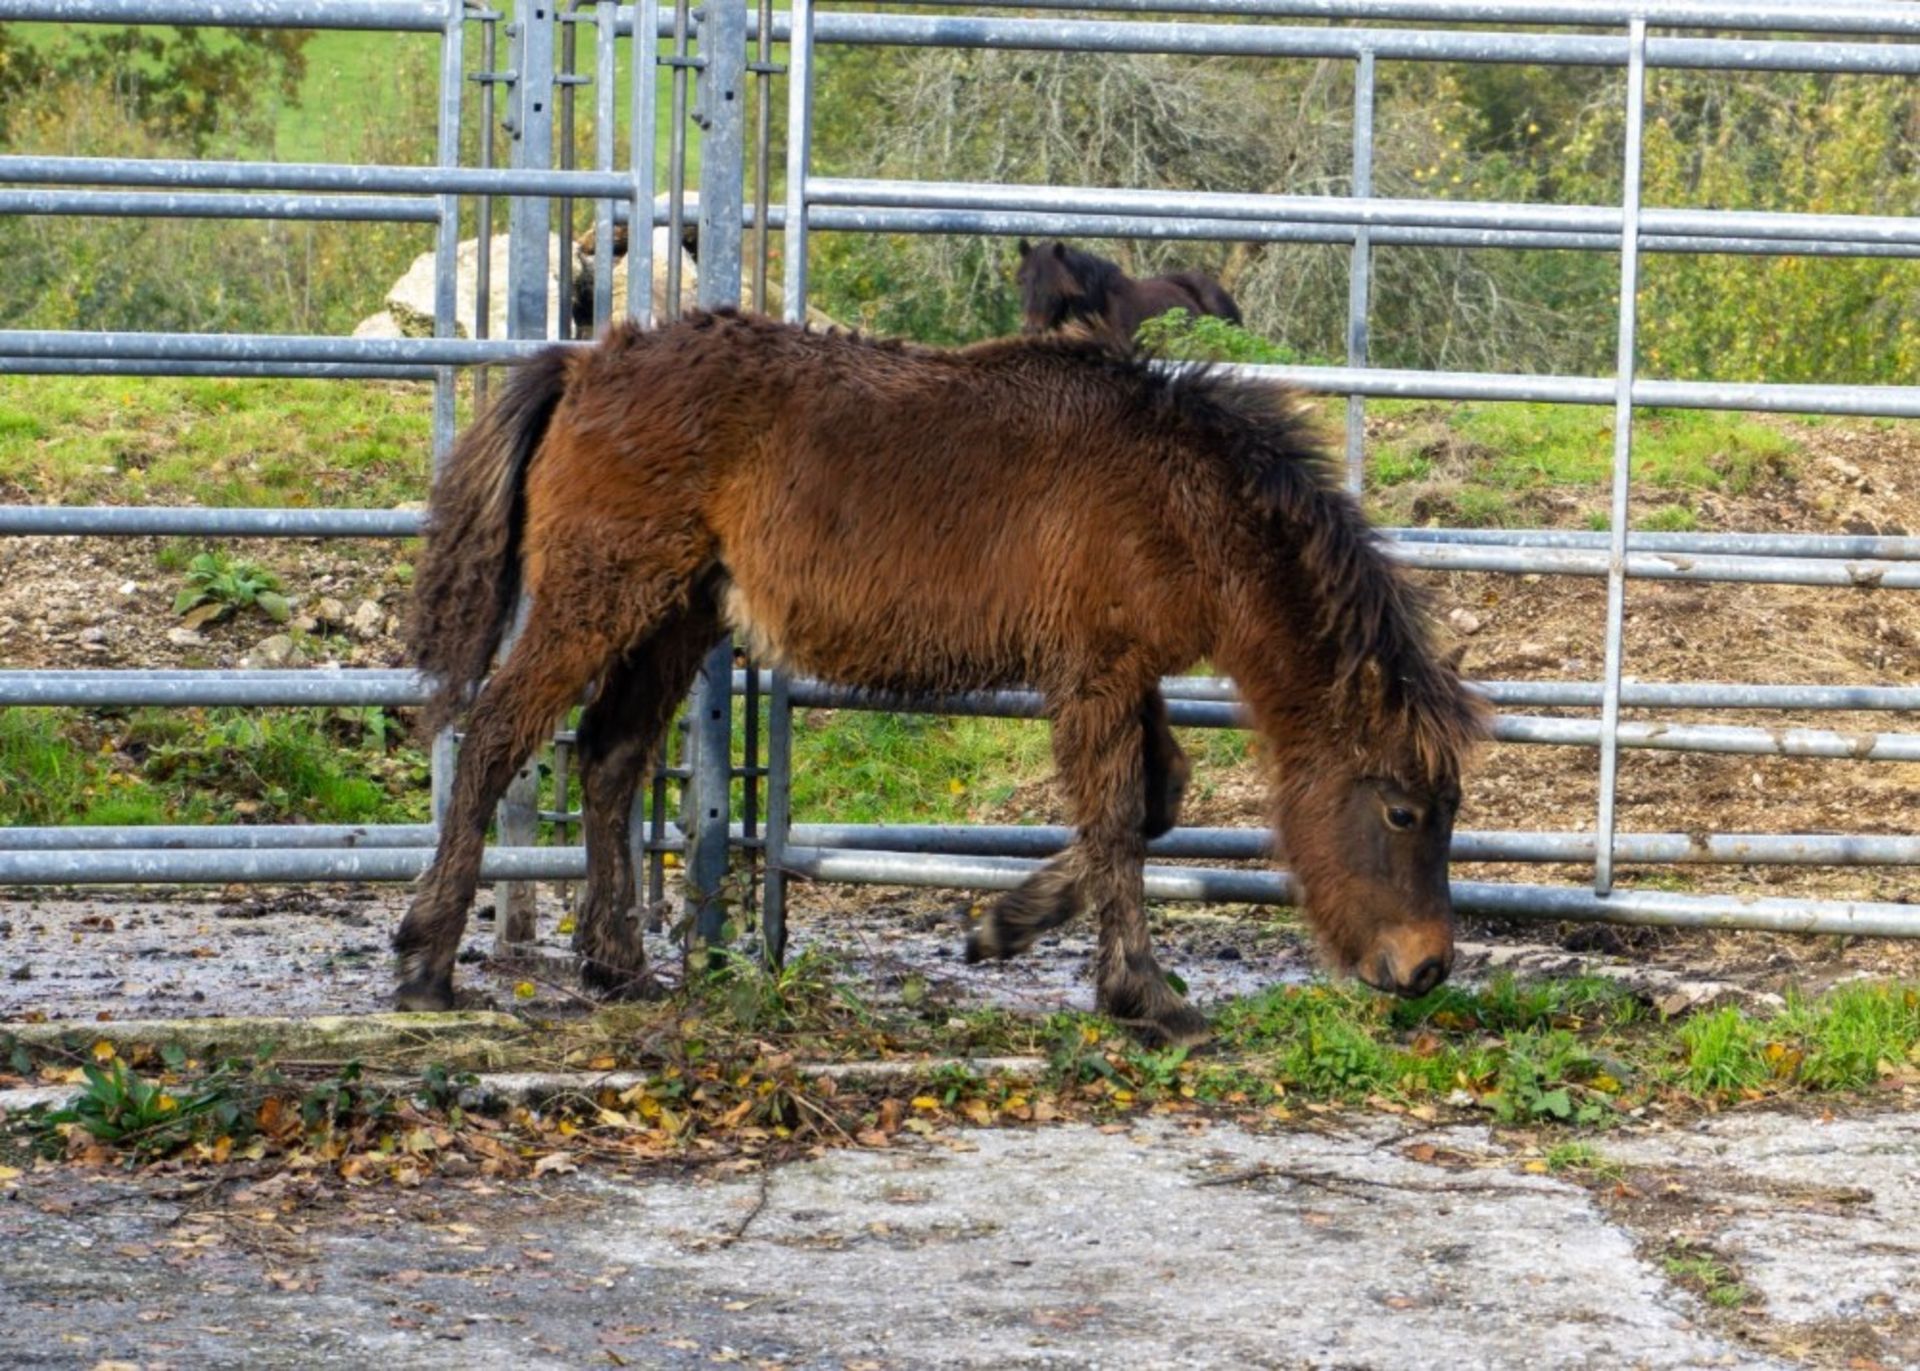 'CHINKWELL JAZZ'S LAD' DARTMOOR HILL PONY BAY COLT APPROX 6 MONTHS OLD - Image 2 of 2